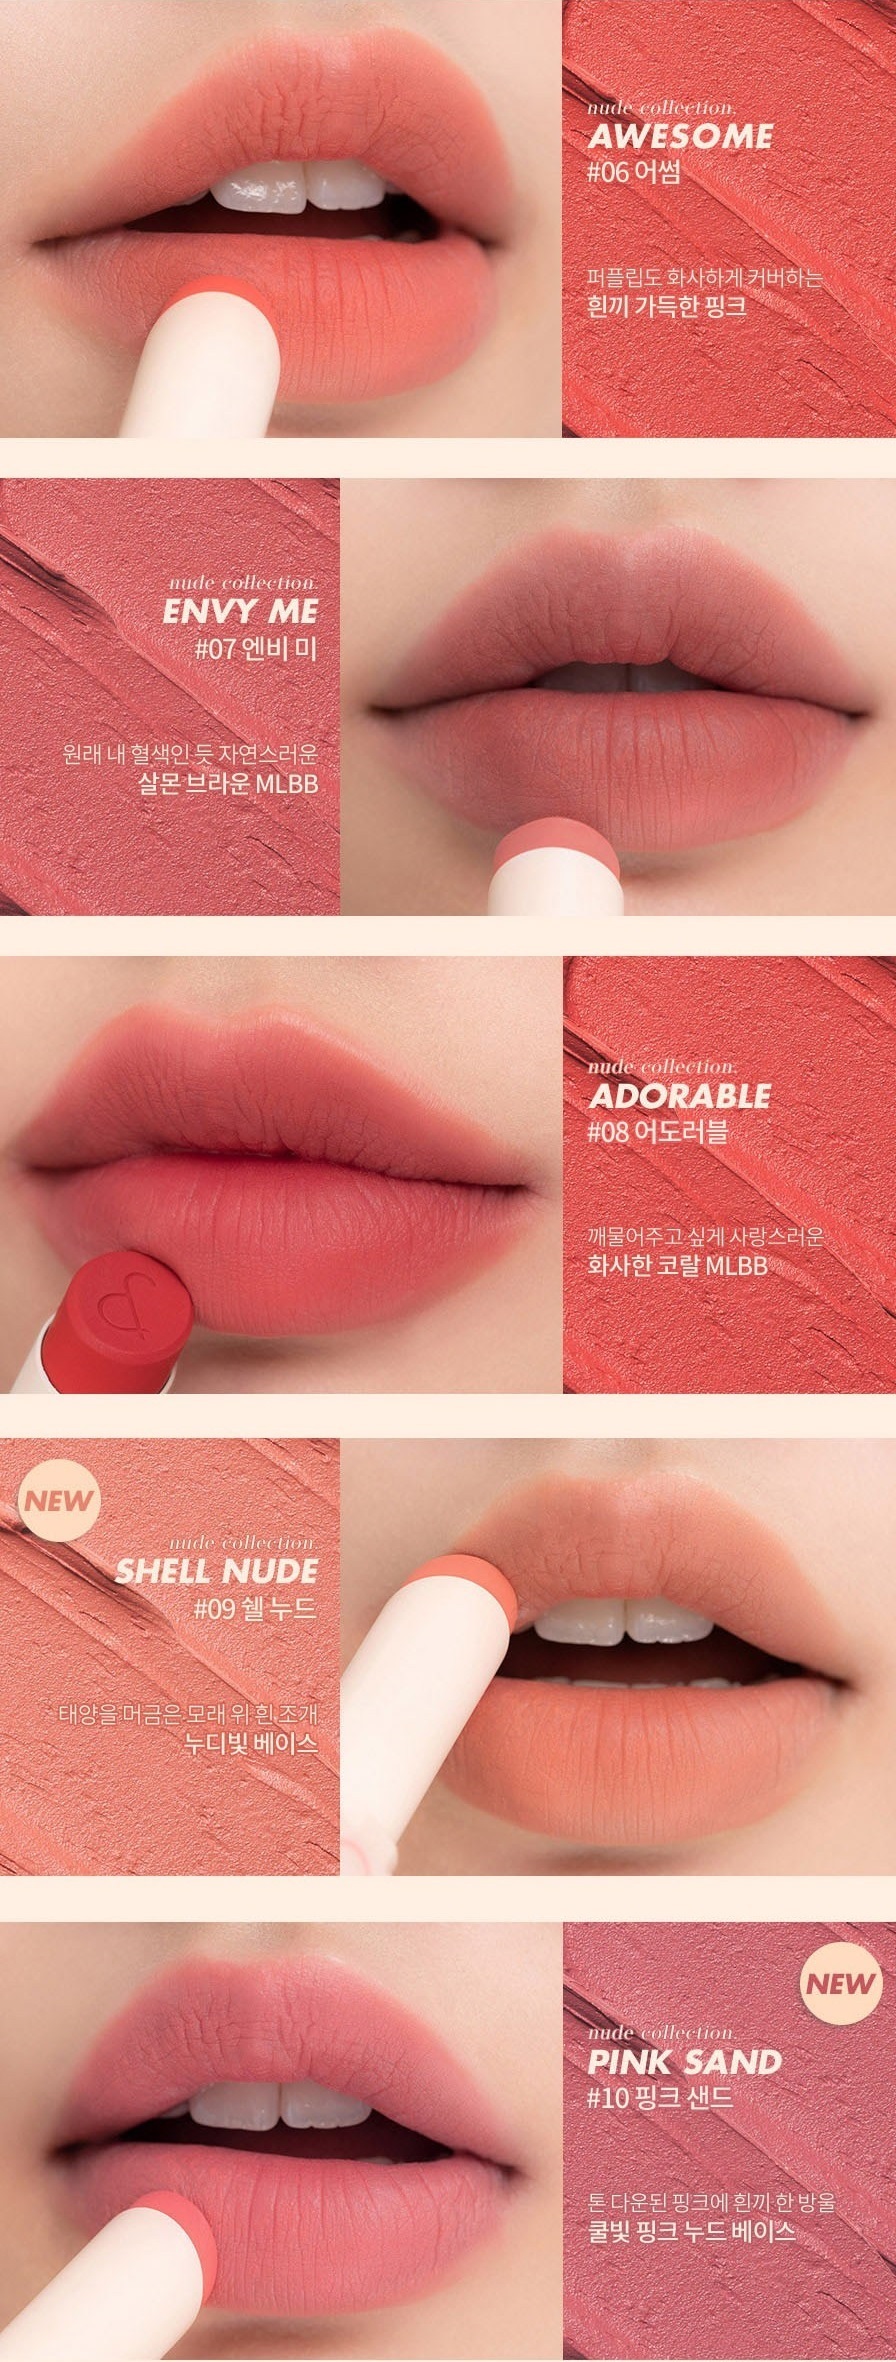 ROMAND Zero Matte Lipstick Awesome Envy Me Adorable Shell Nude Pink Sand